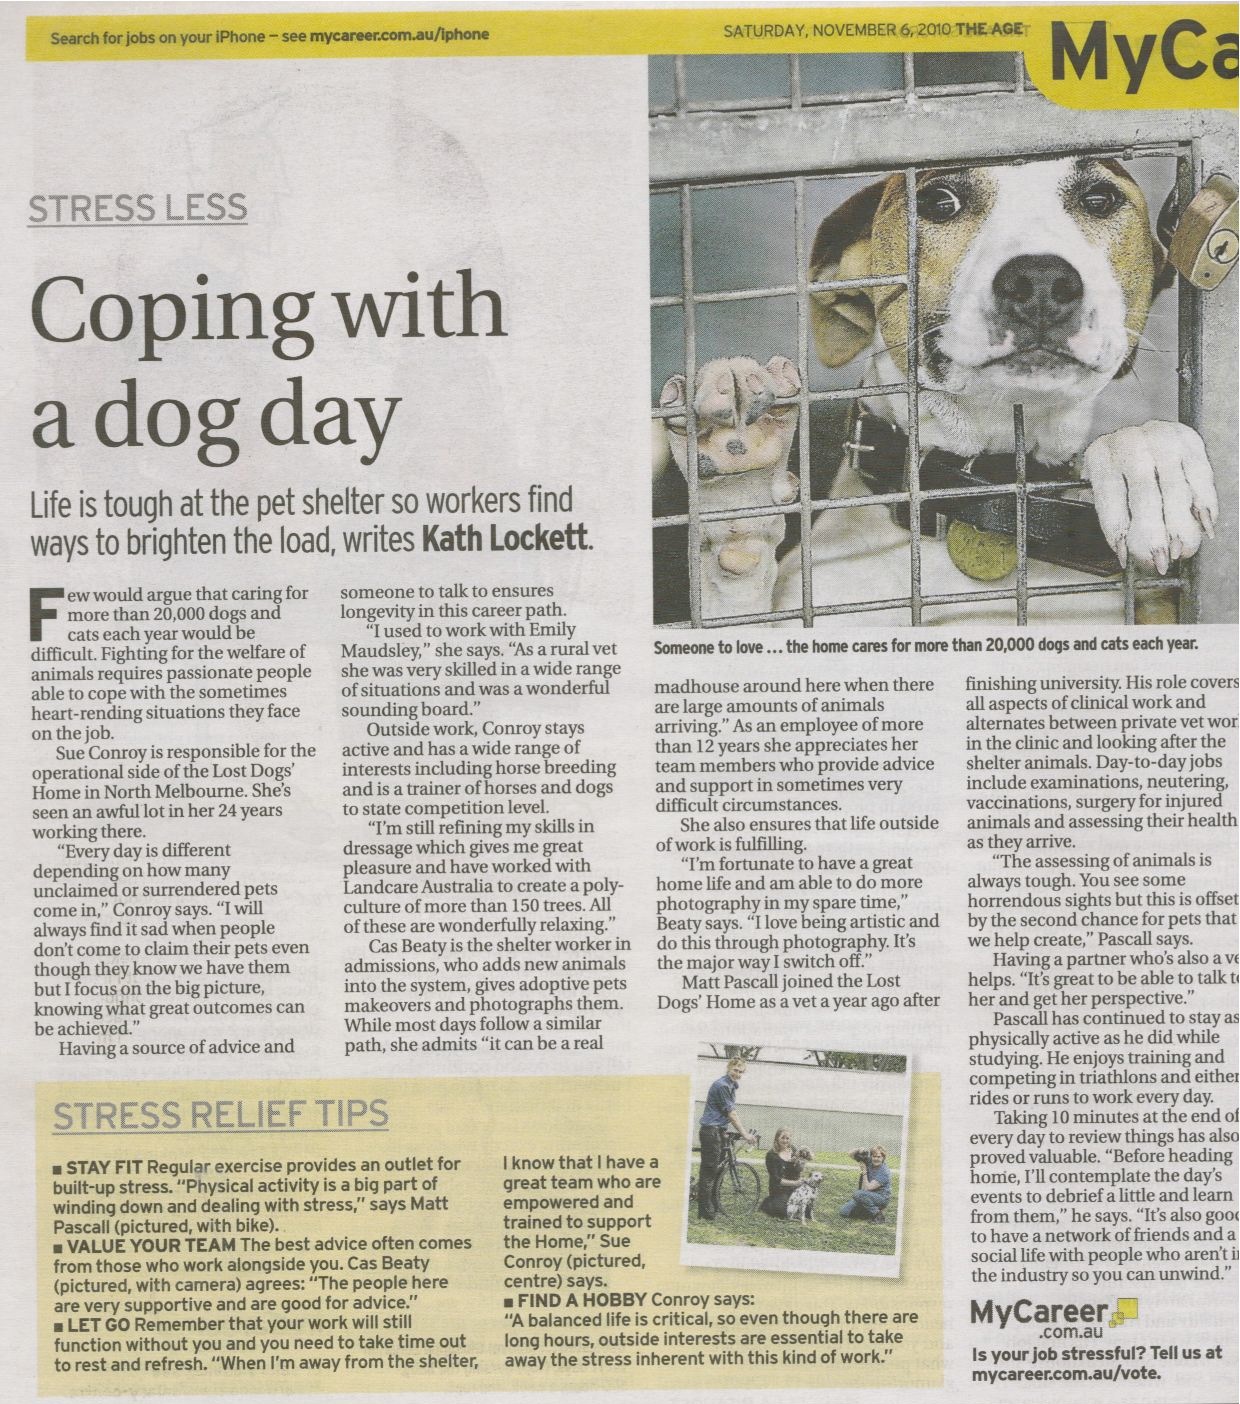 Lost Dogs' Home staff share their thoughts on coping with stress in The  Age's 'MyCareer' - Lost Dogs Home